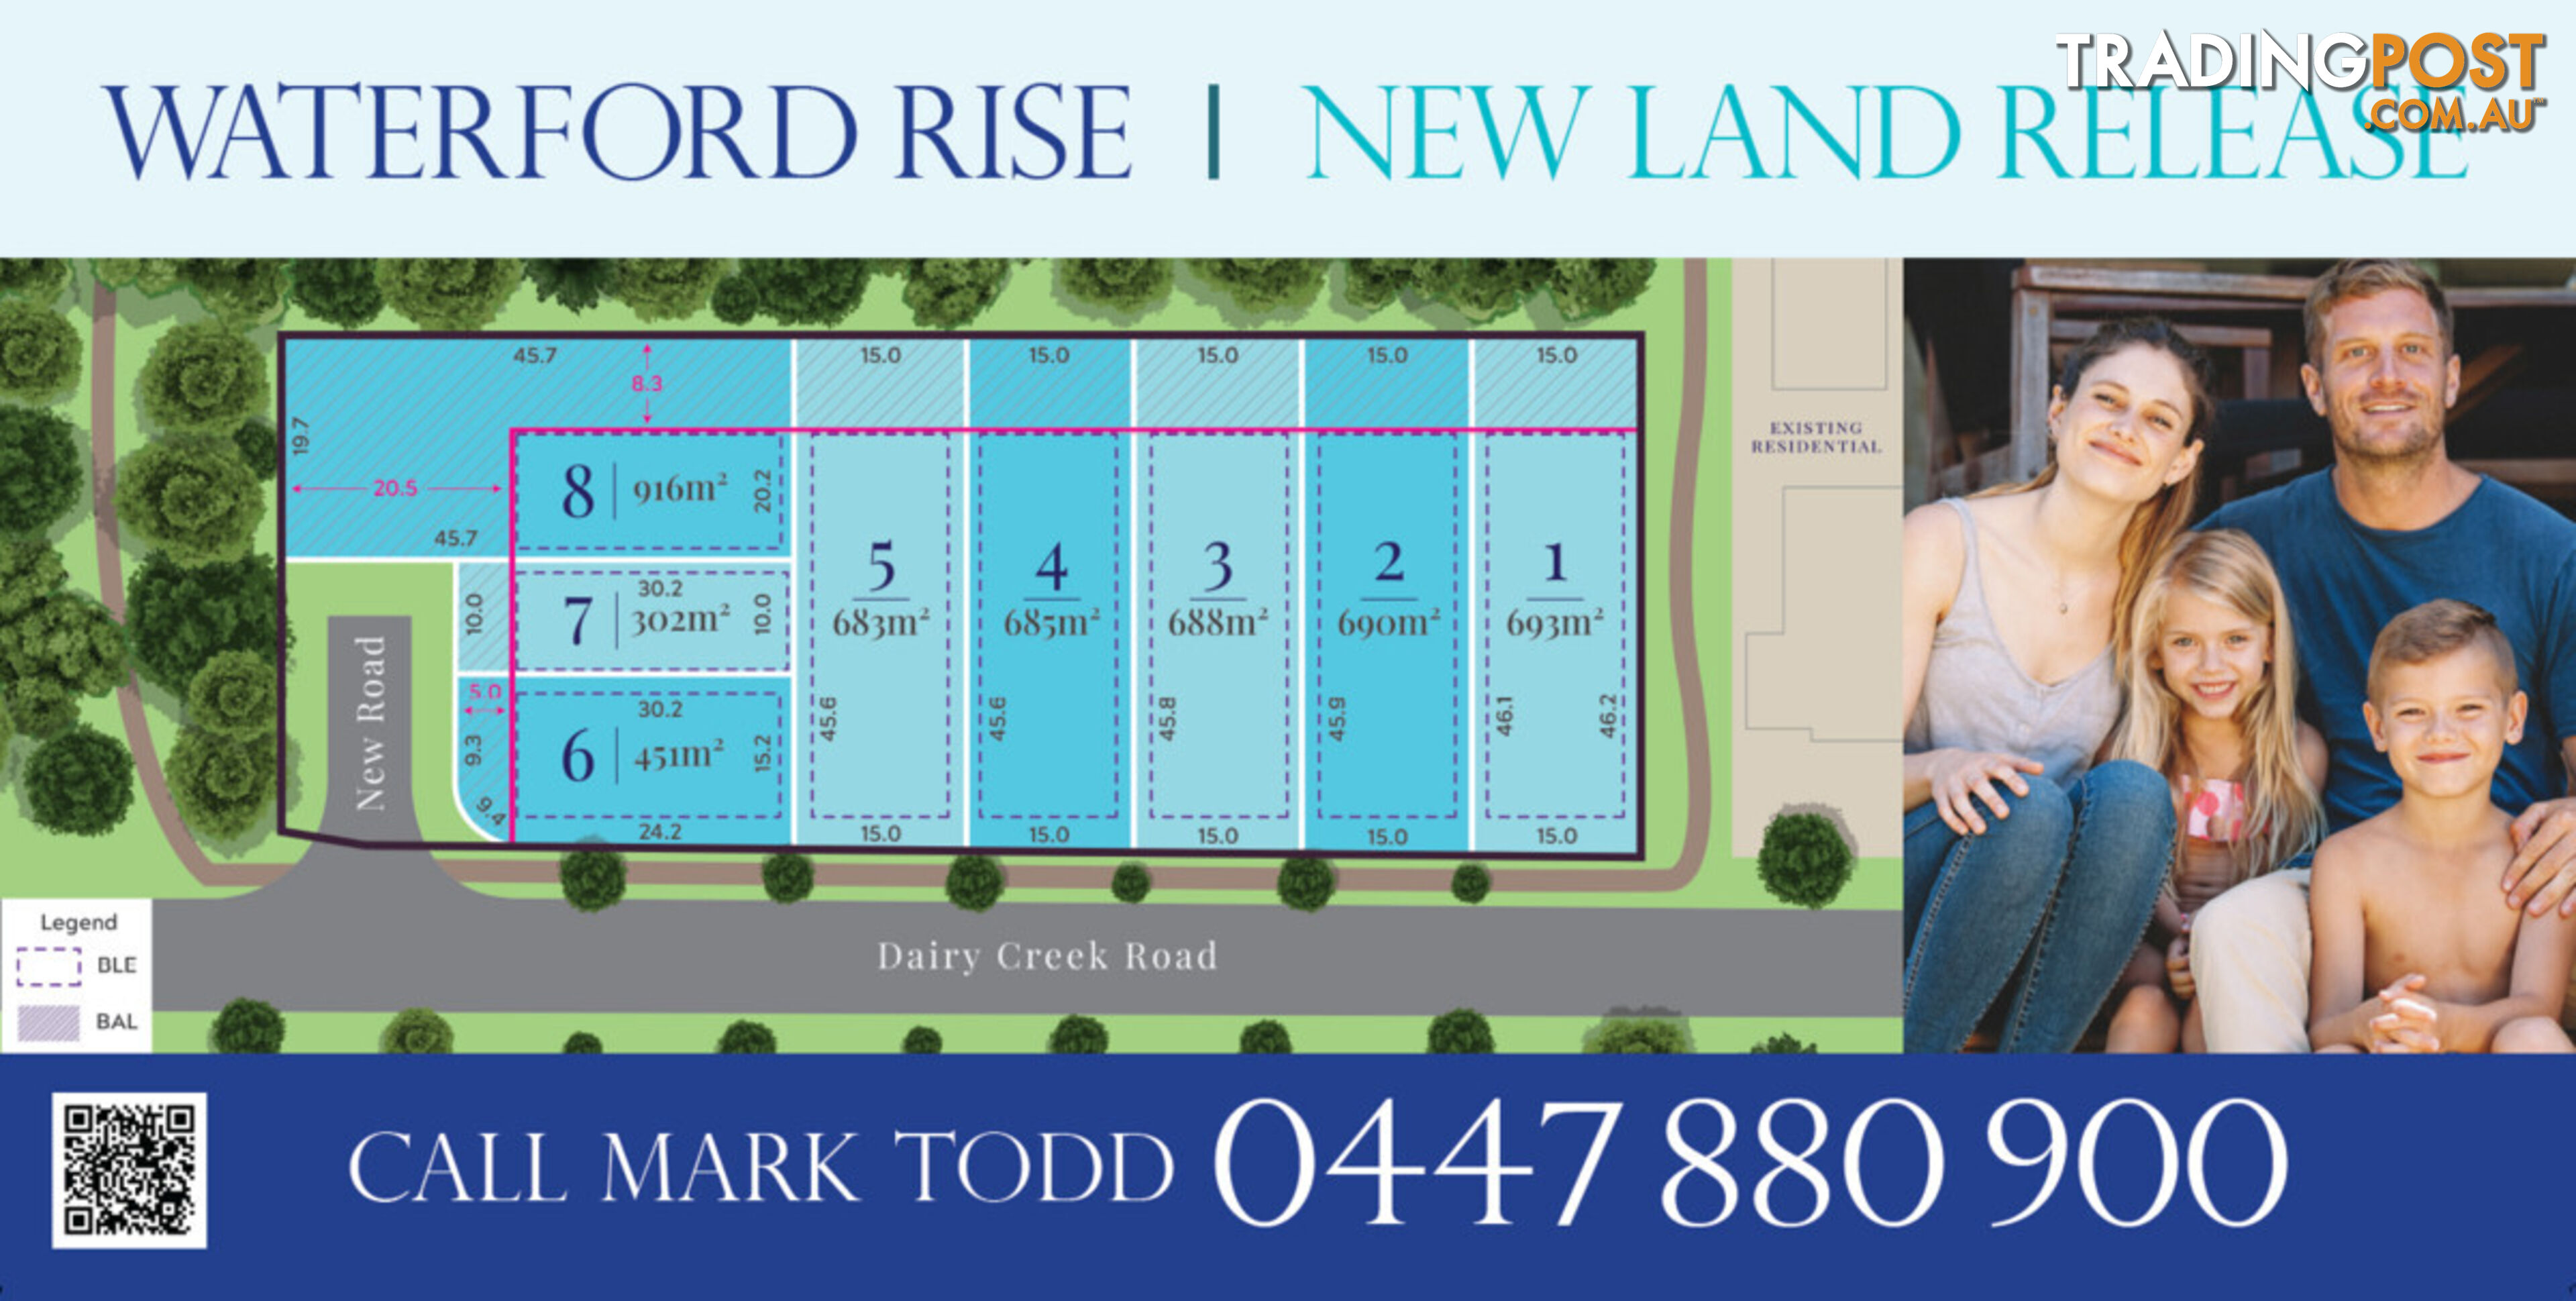 Lot 3/244-254 Dairy Creek Road WATERFORD QLD 4133